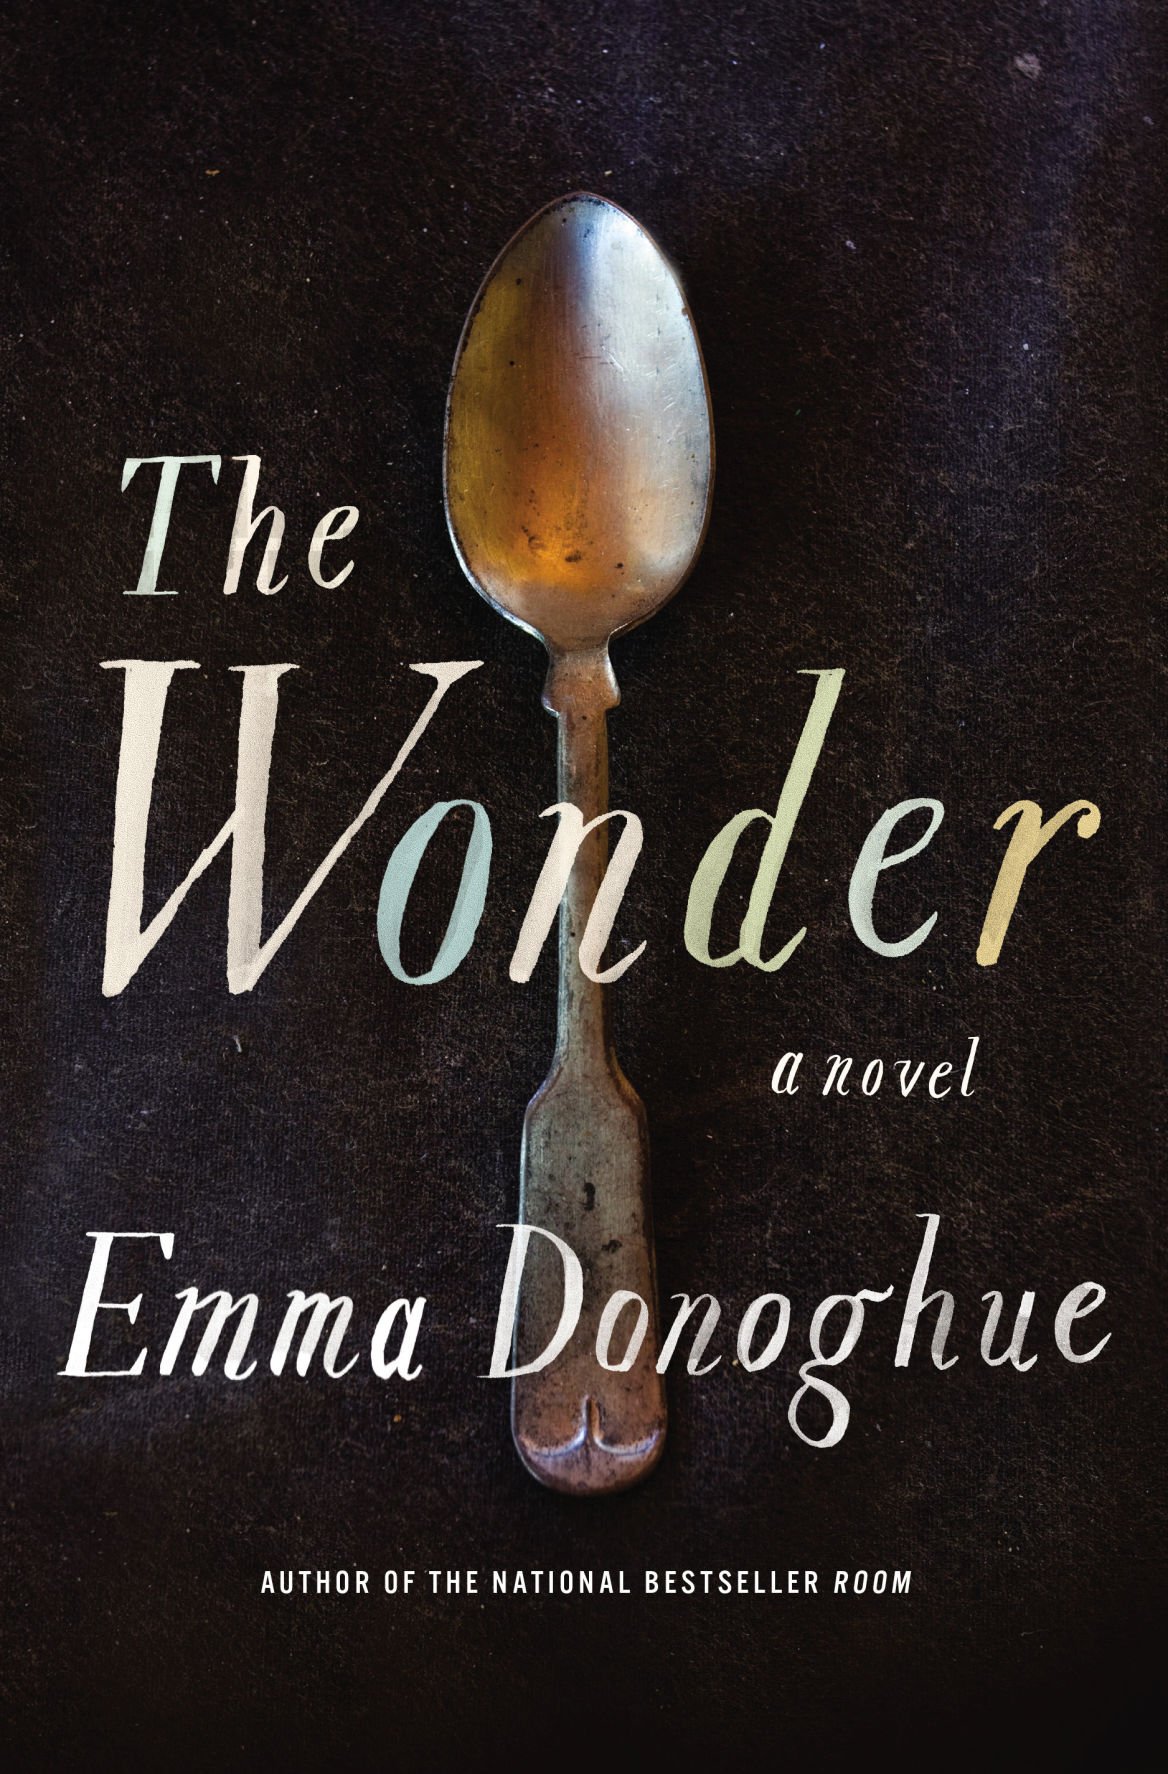 emma donoghue haven review